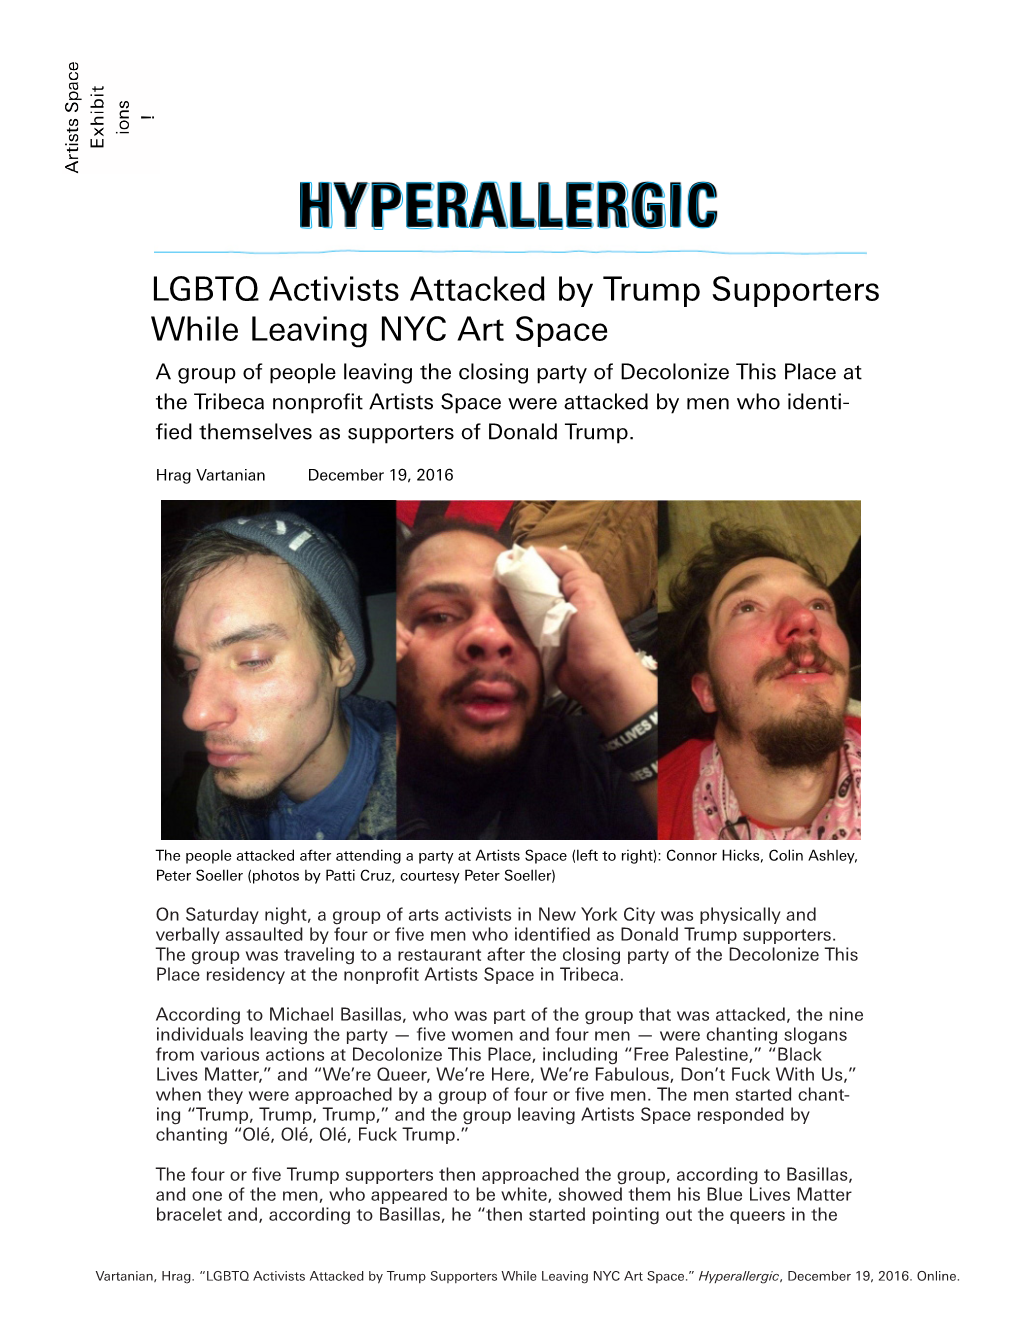 LGBTQ Activists Attacked by Trump Supporters While Leaving NYC Art